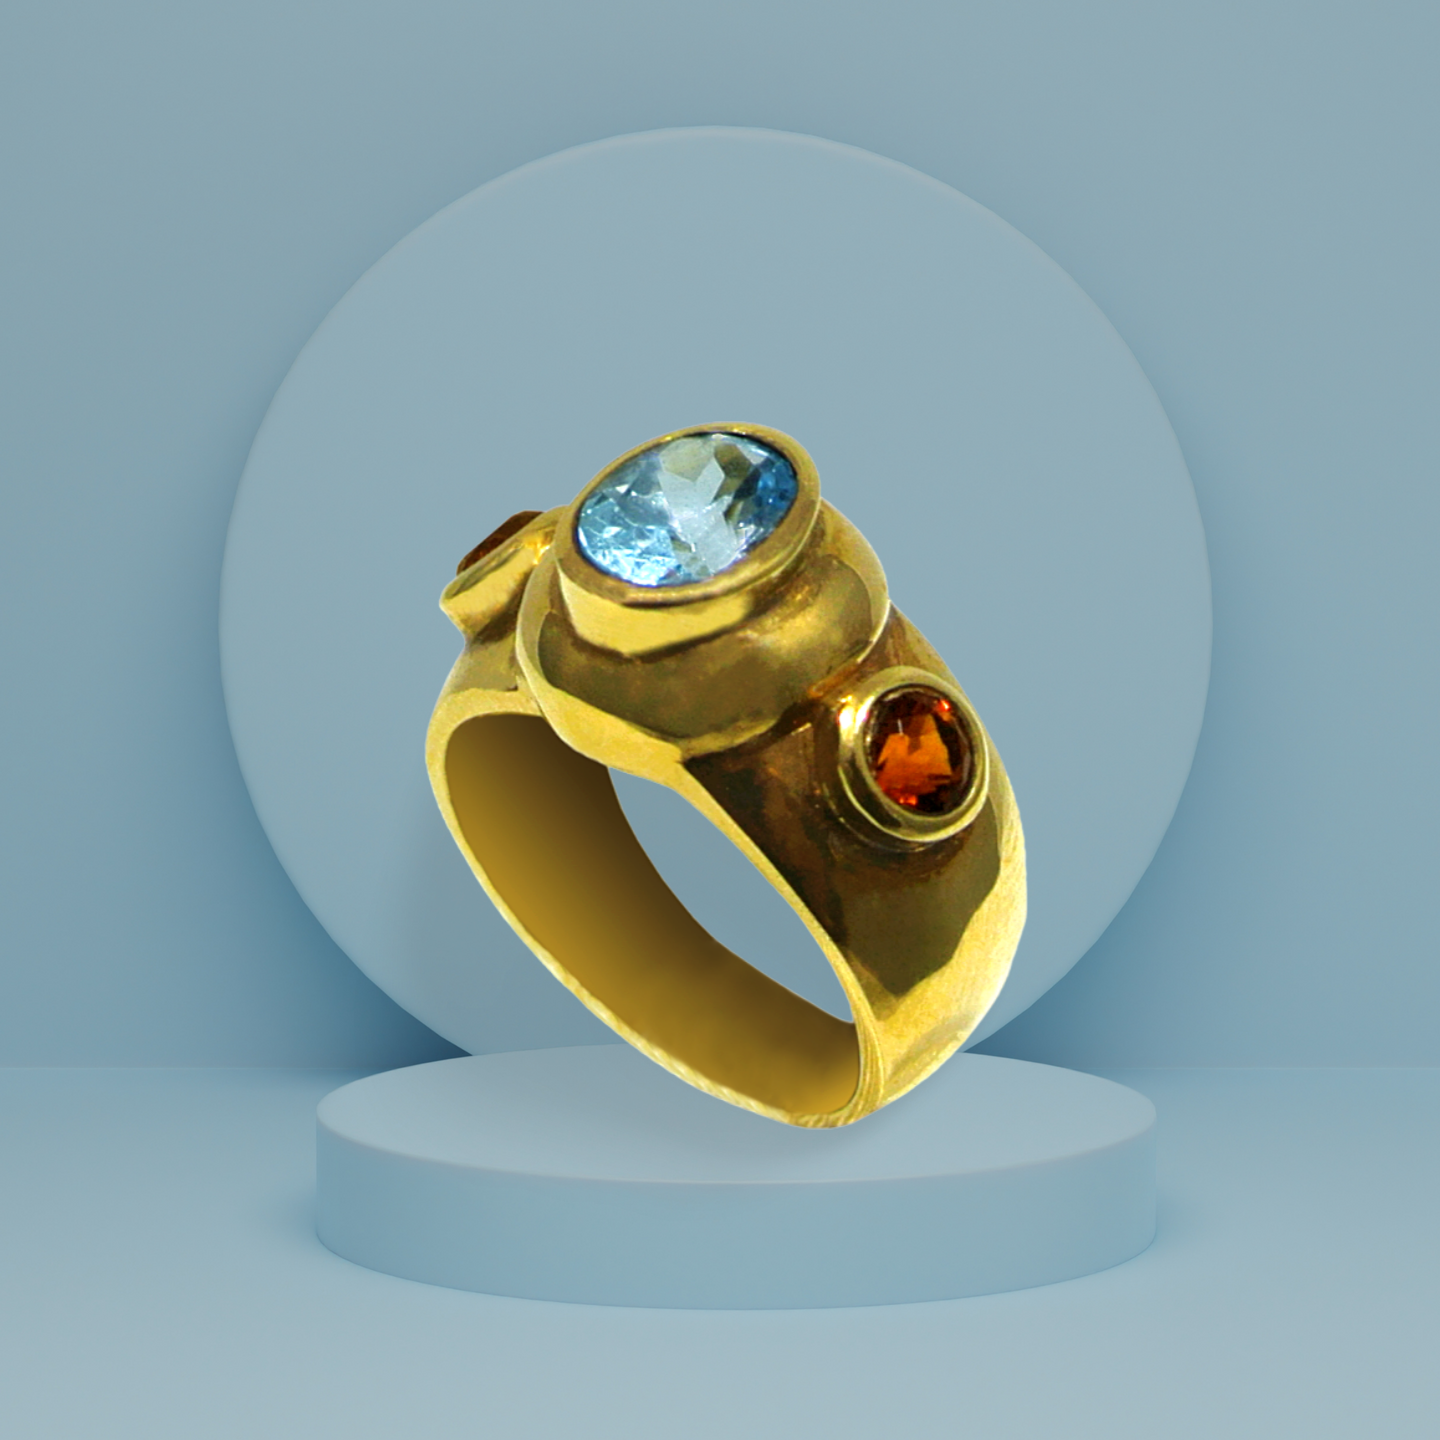 Ring in 14k Gold with bleu topaz and citrine (B-32)